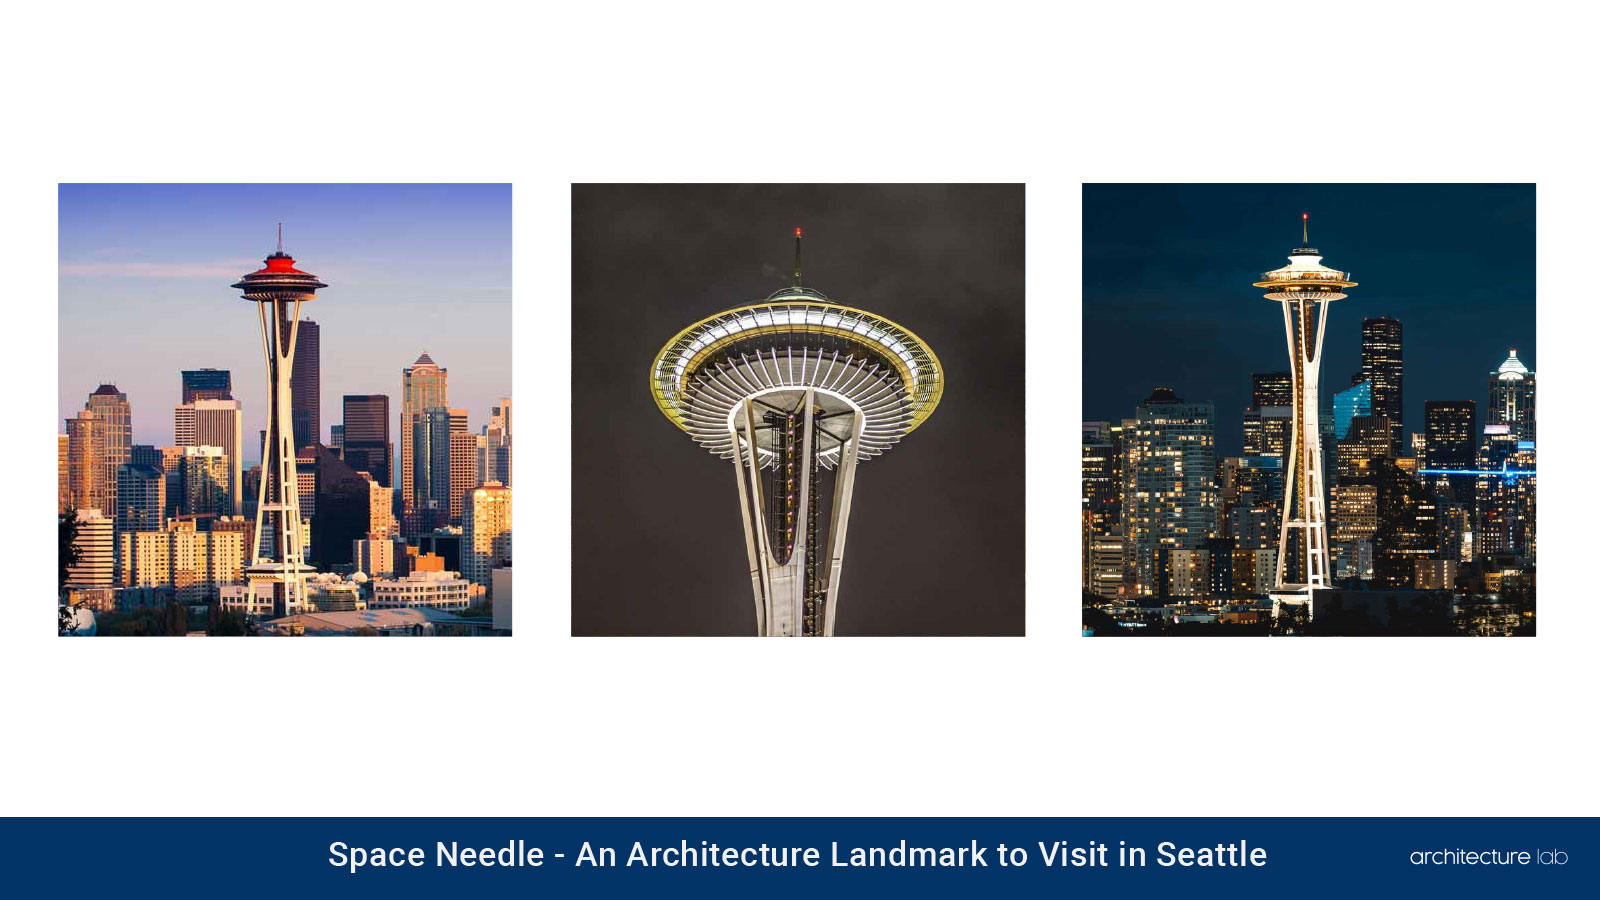 Space needle: an architecture landmark to visit in seattle